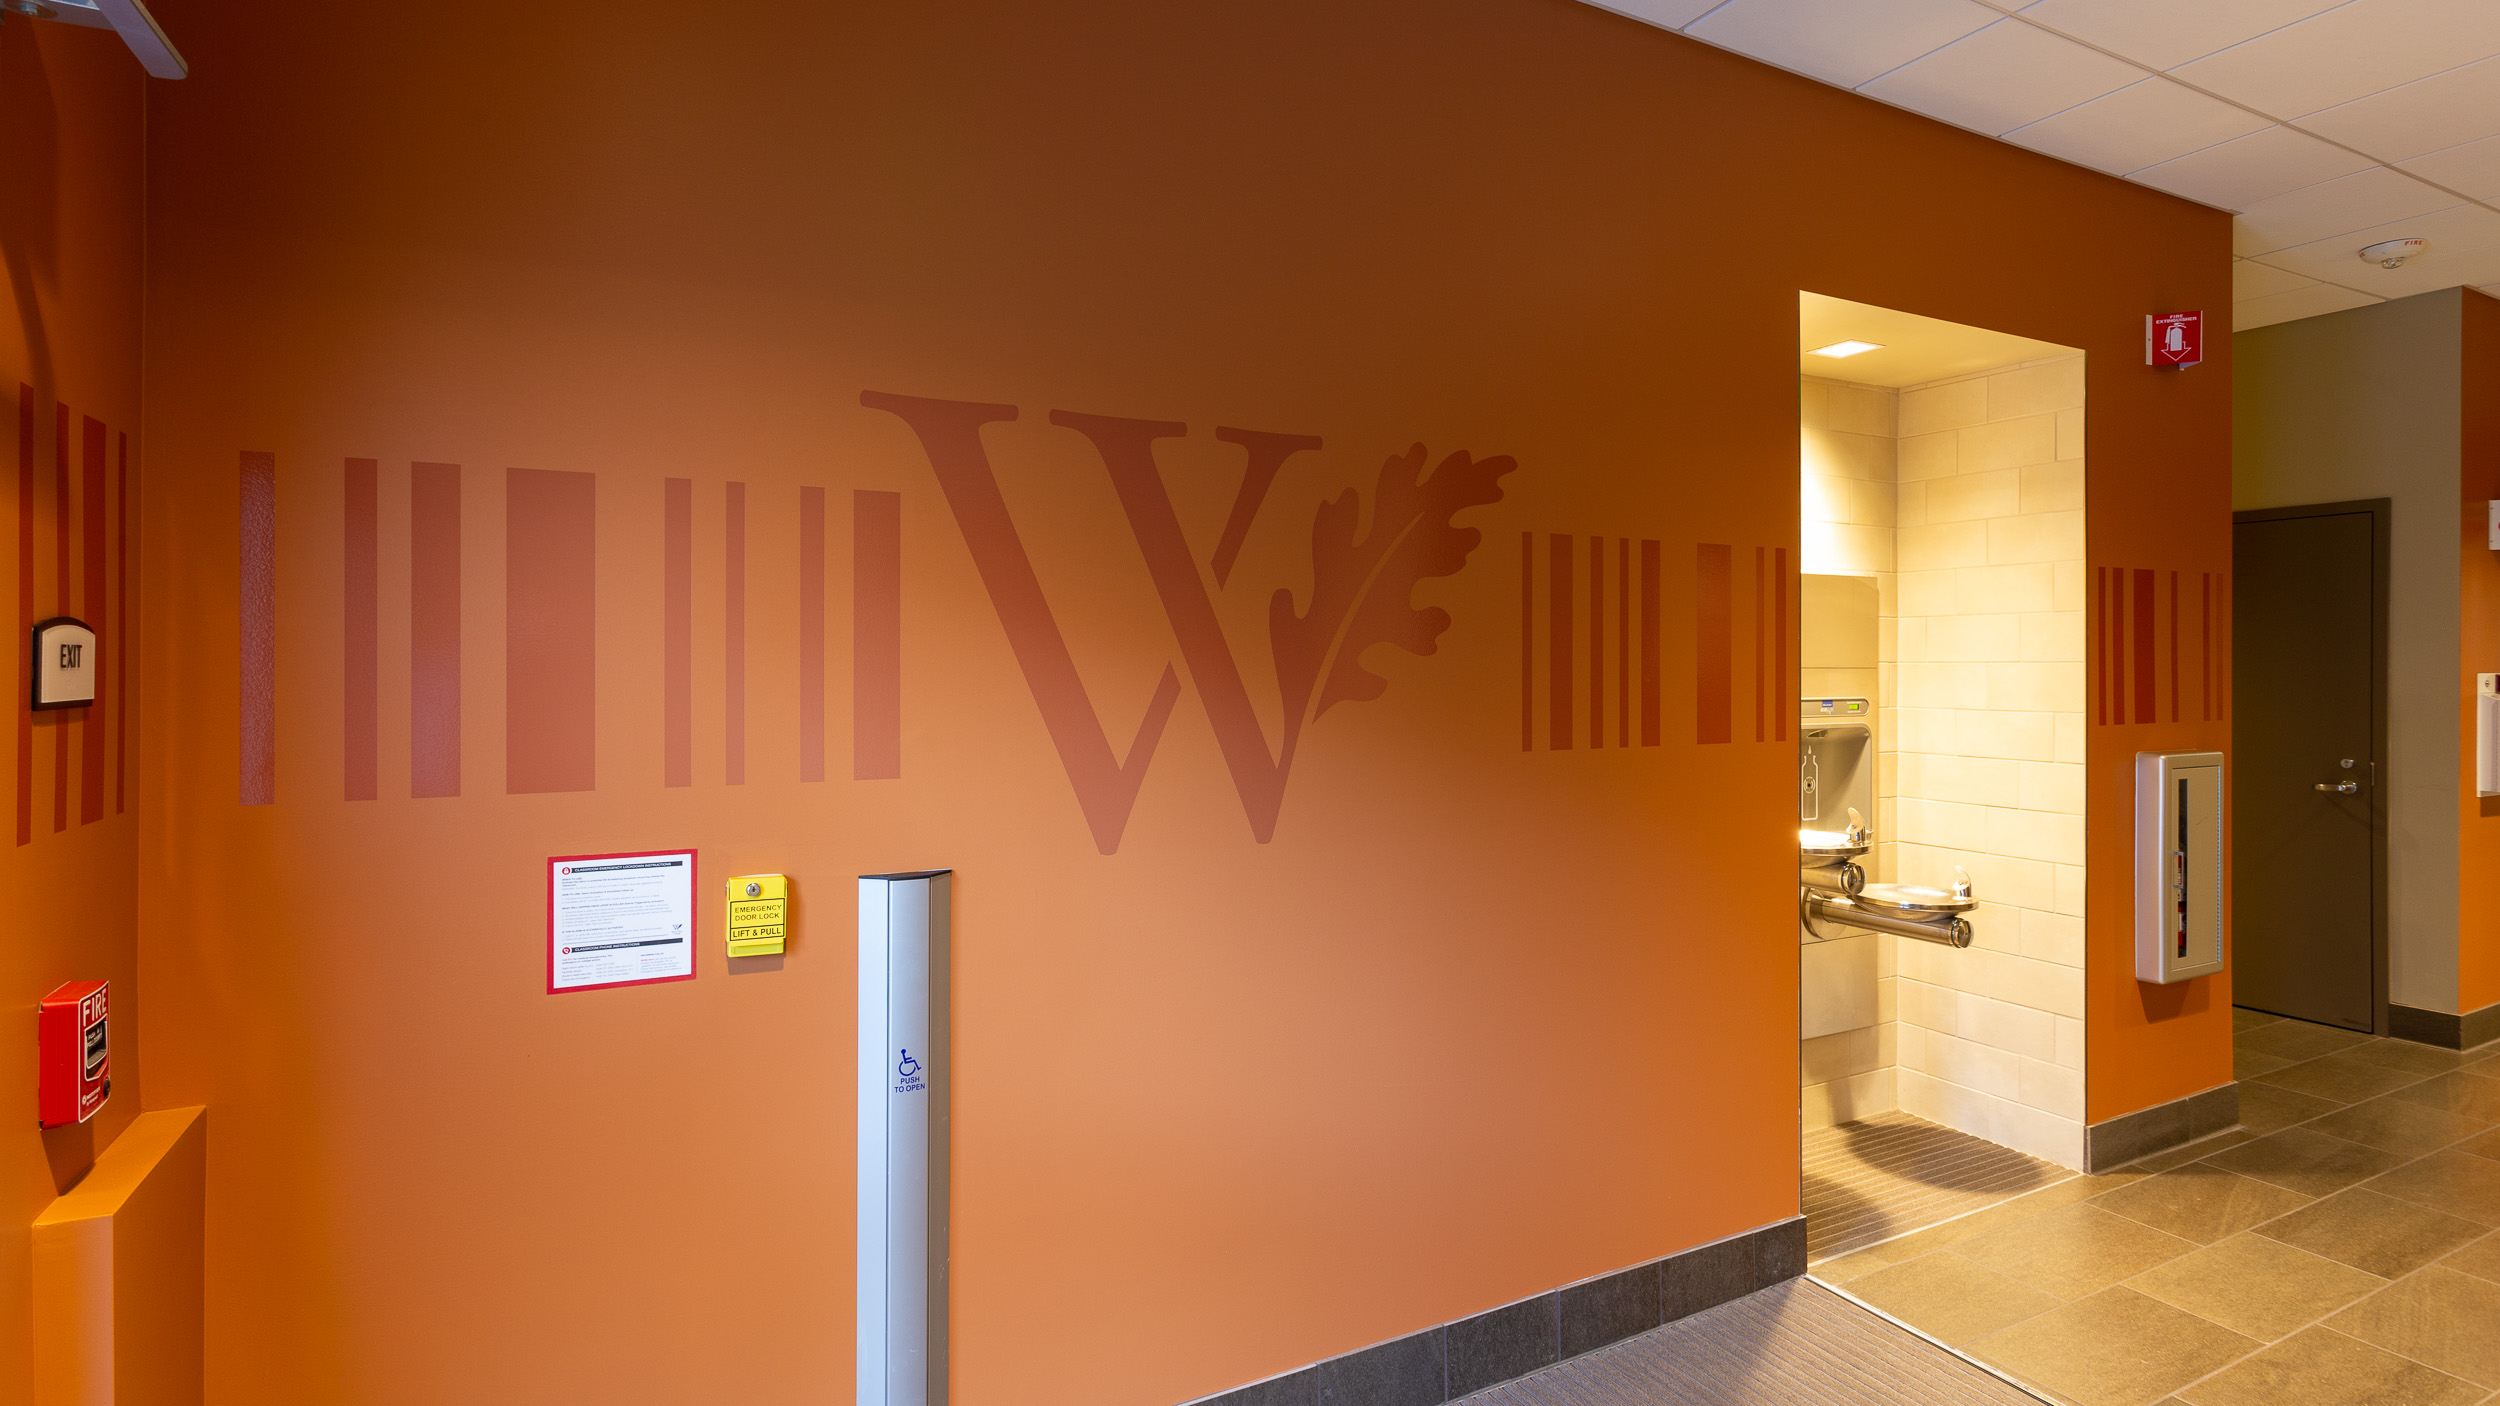 West Valley College Student Services Center Custom Branded Wallpaper